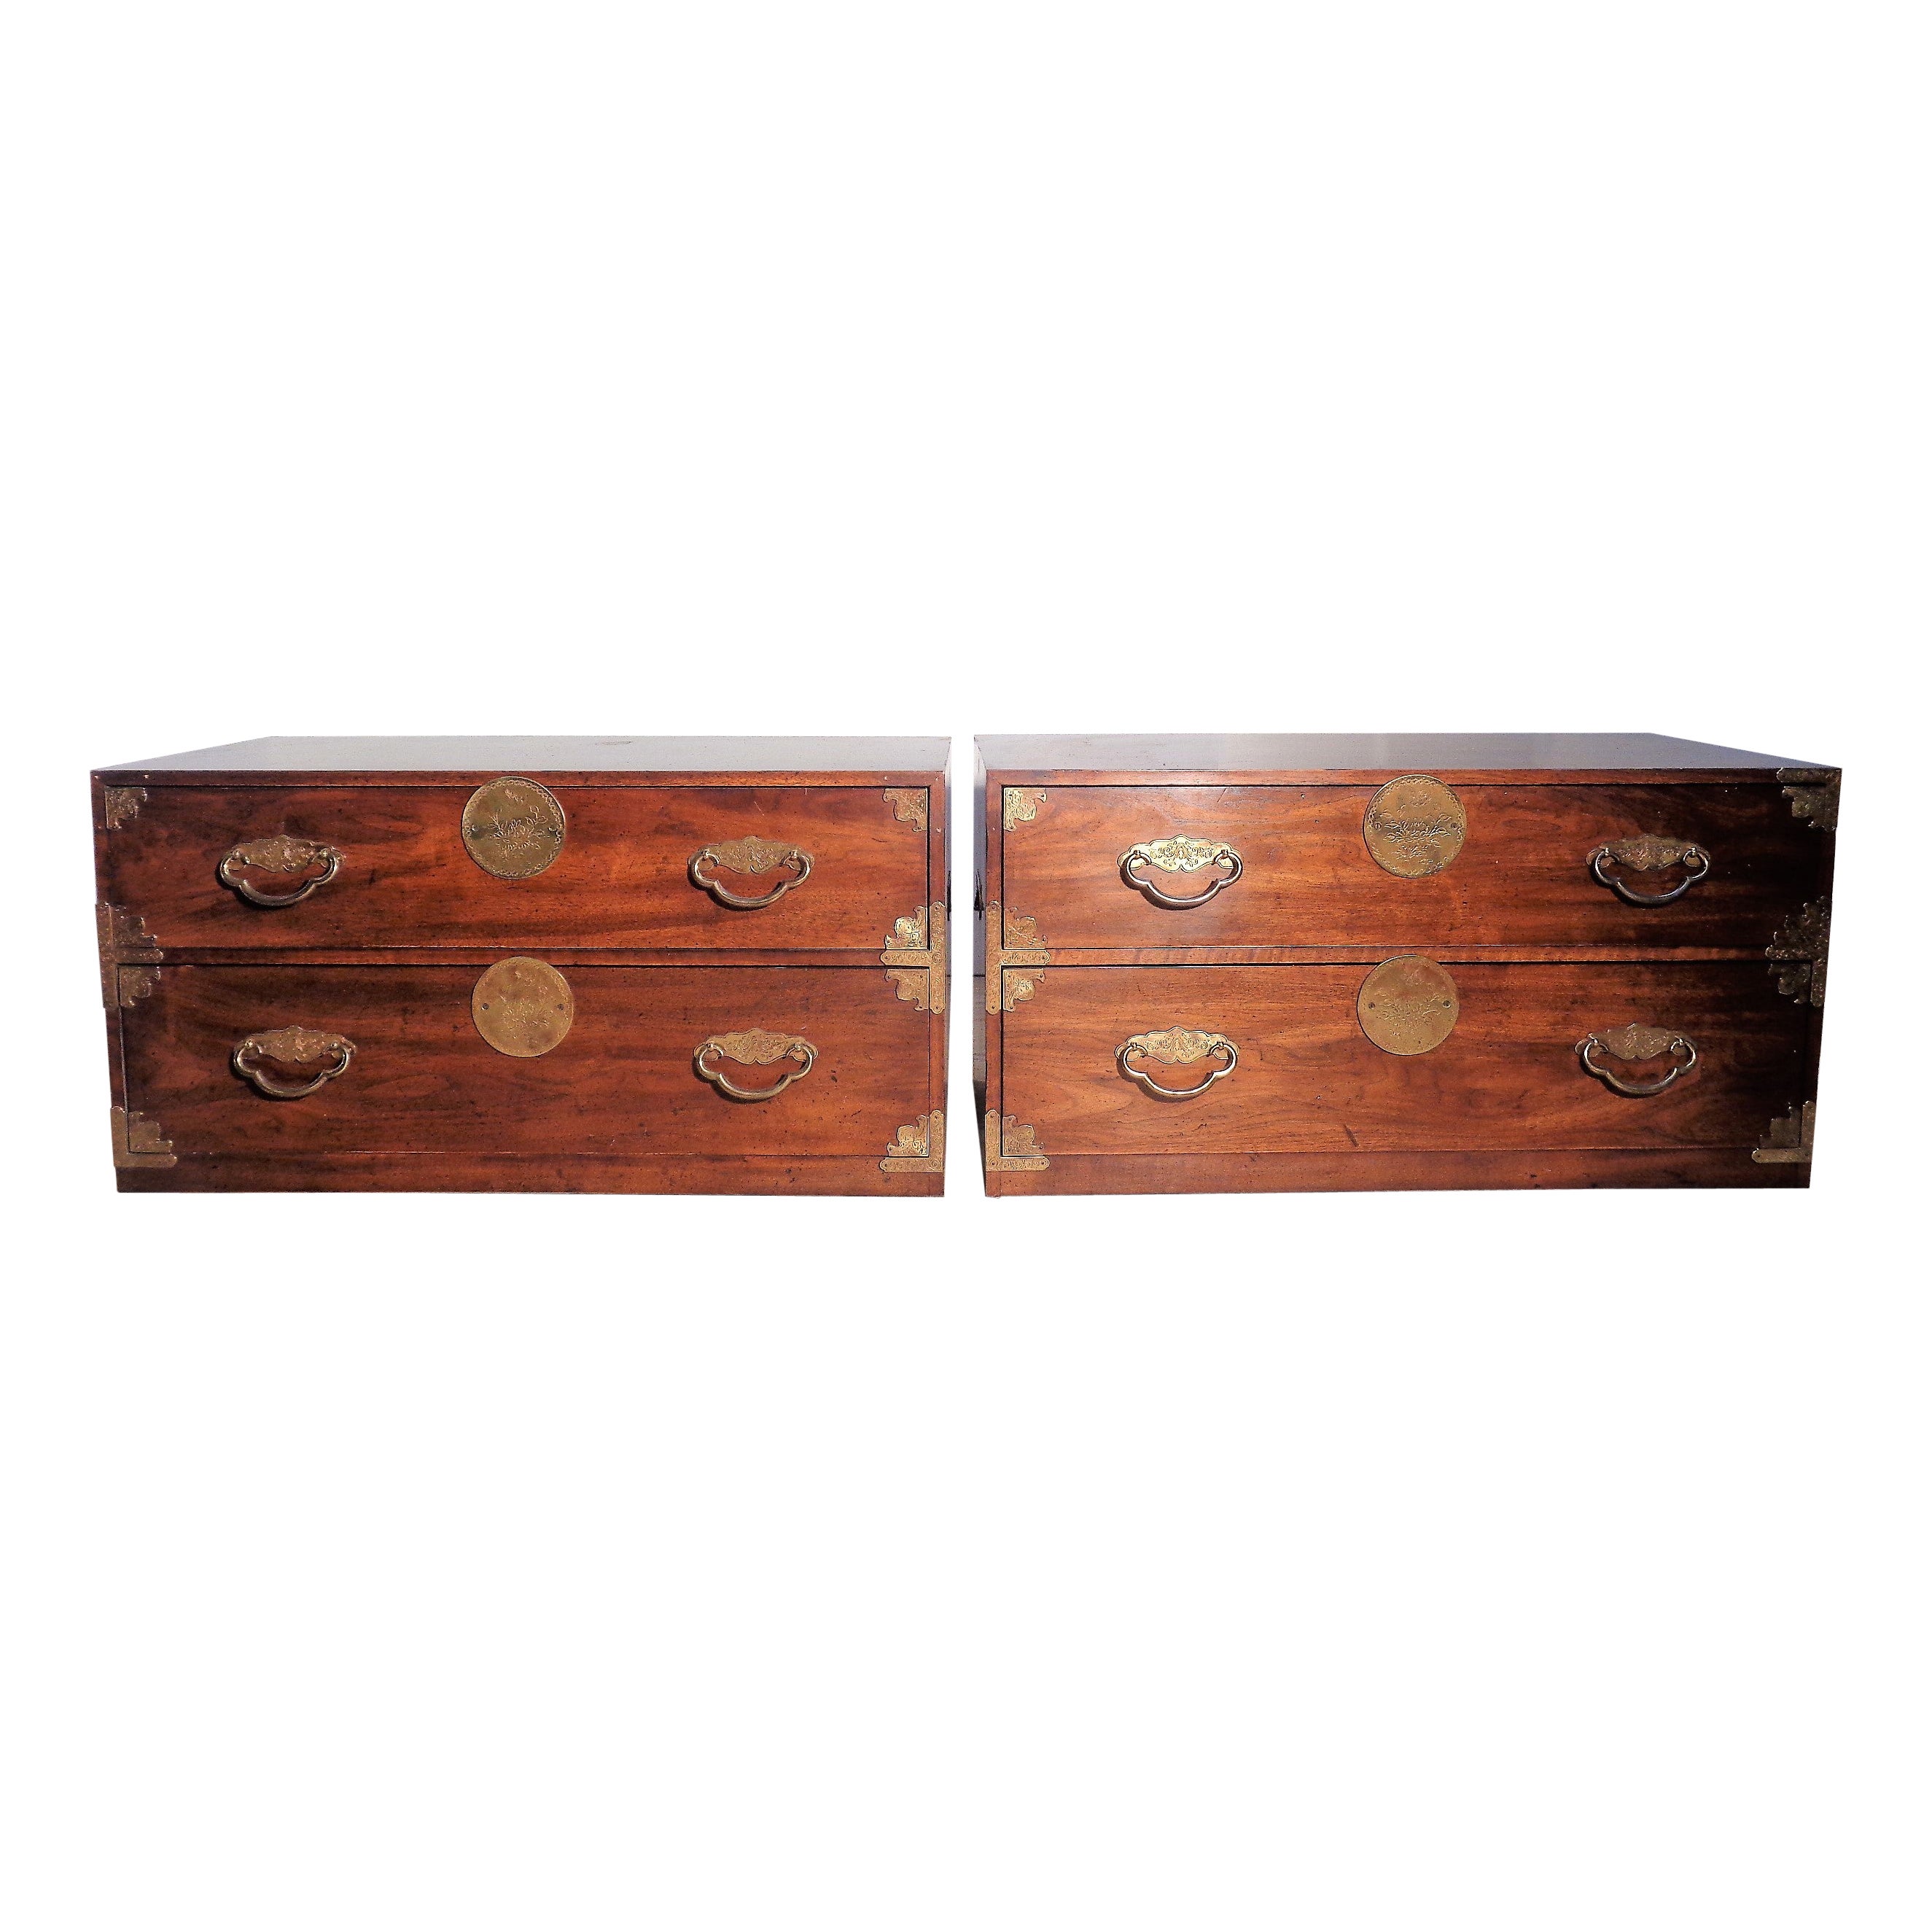 Pair Asian Modern Style Walnut Campaign Chests Henredon, 1970's For Sale